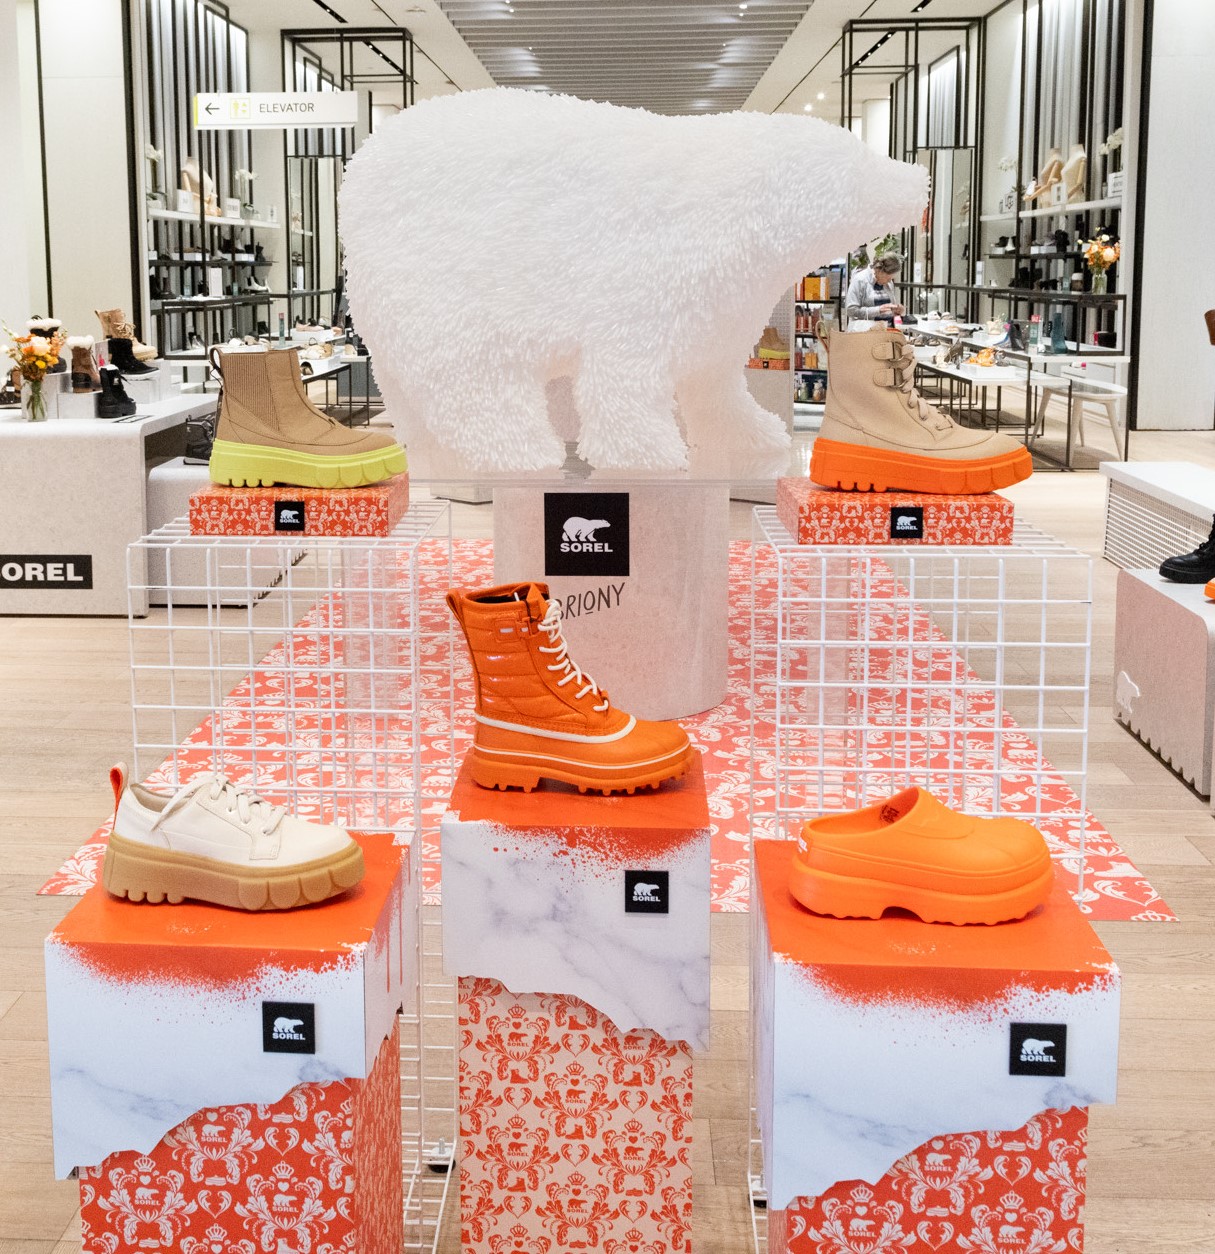 Sorel exclusive pop-up at the Bay, boots, clogs and footwear.